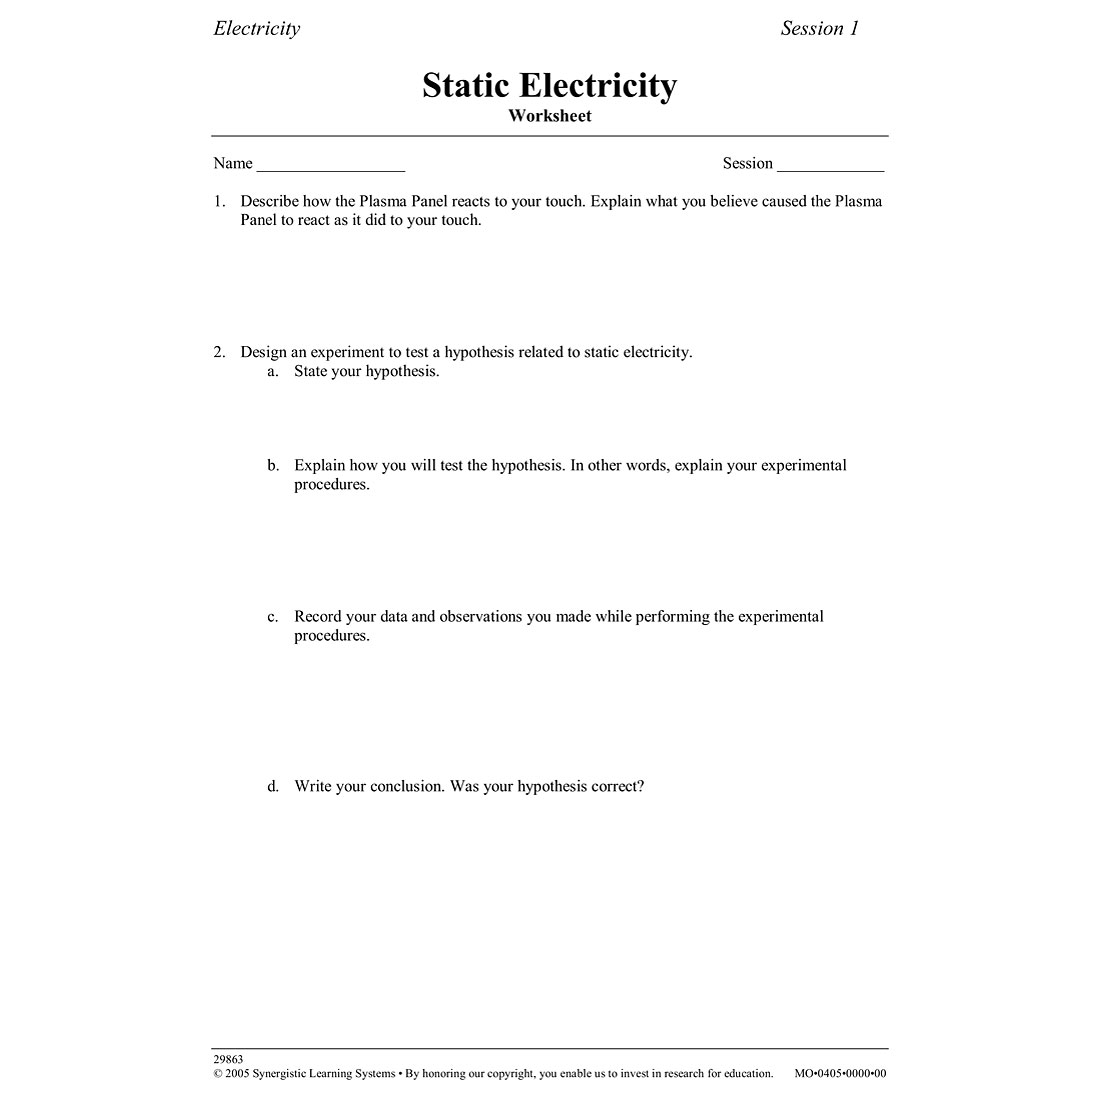 Static Electricity Worksheets Image